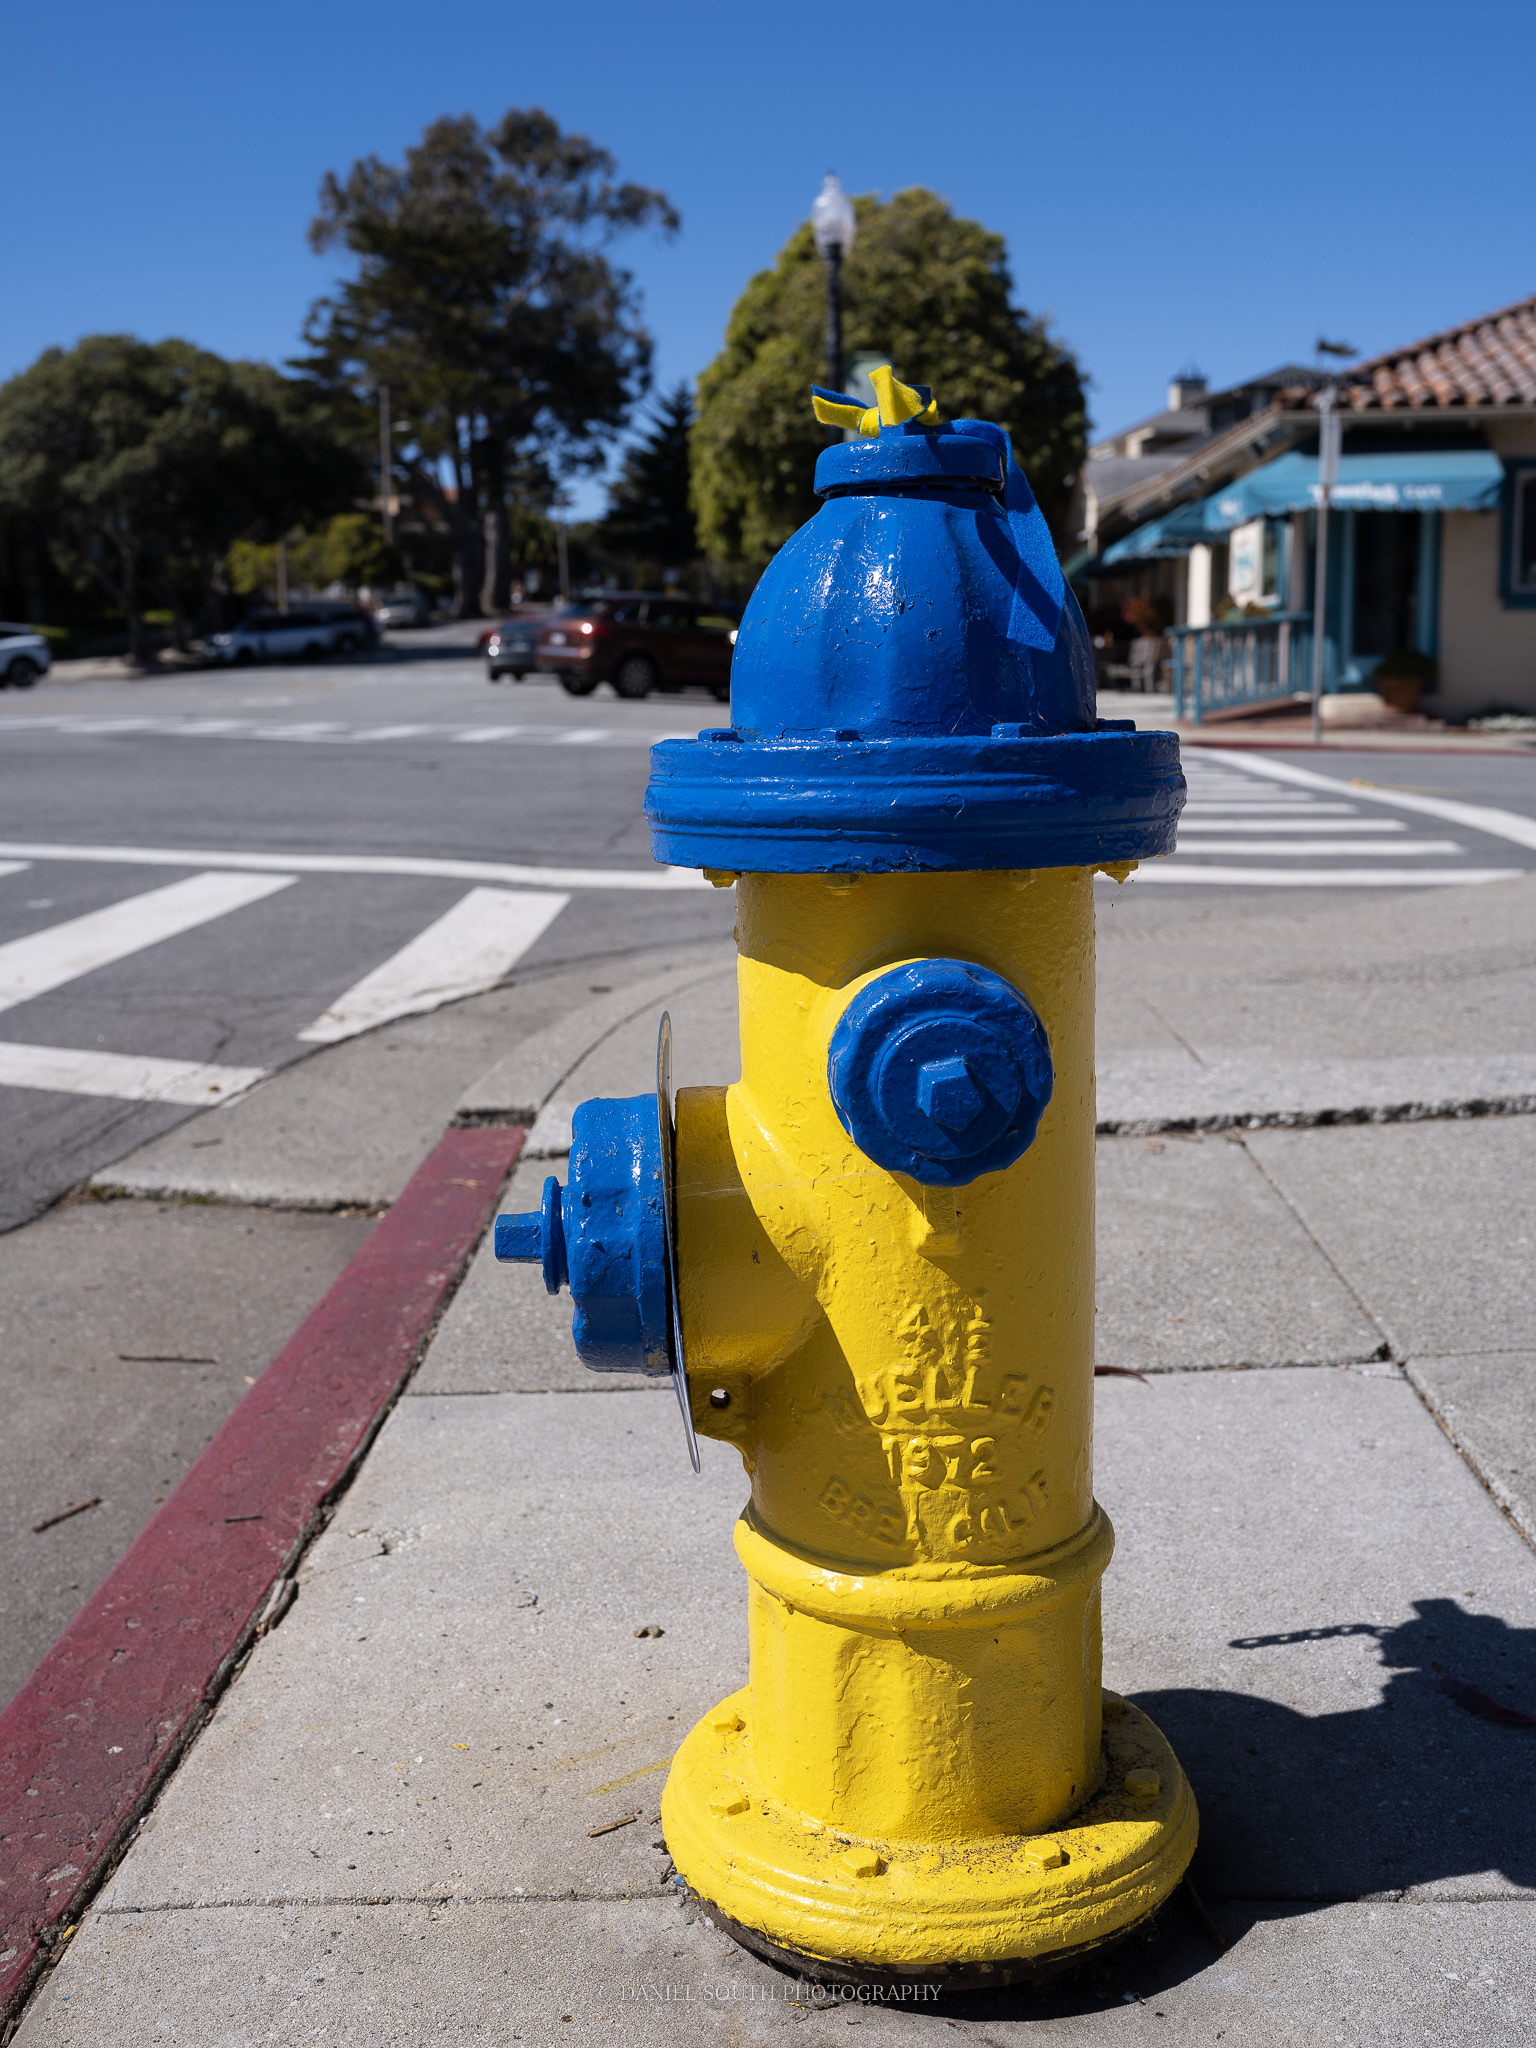 a photo of a colorful fire hydrant in pacific grove california